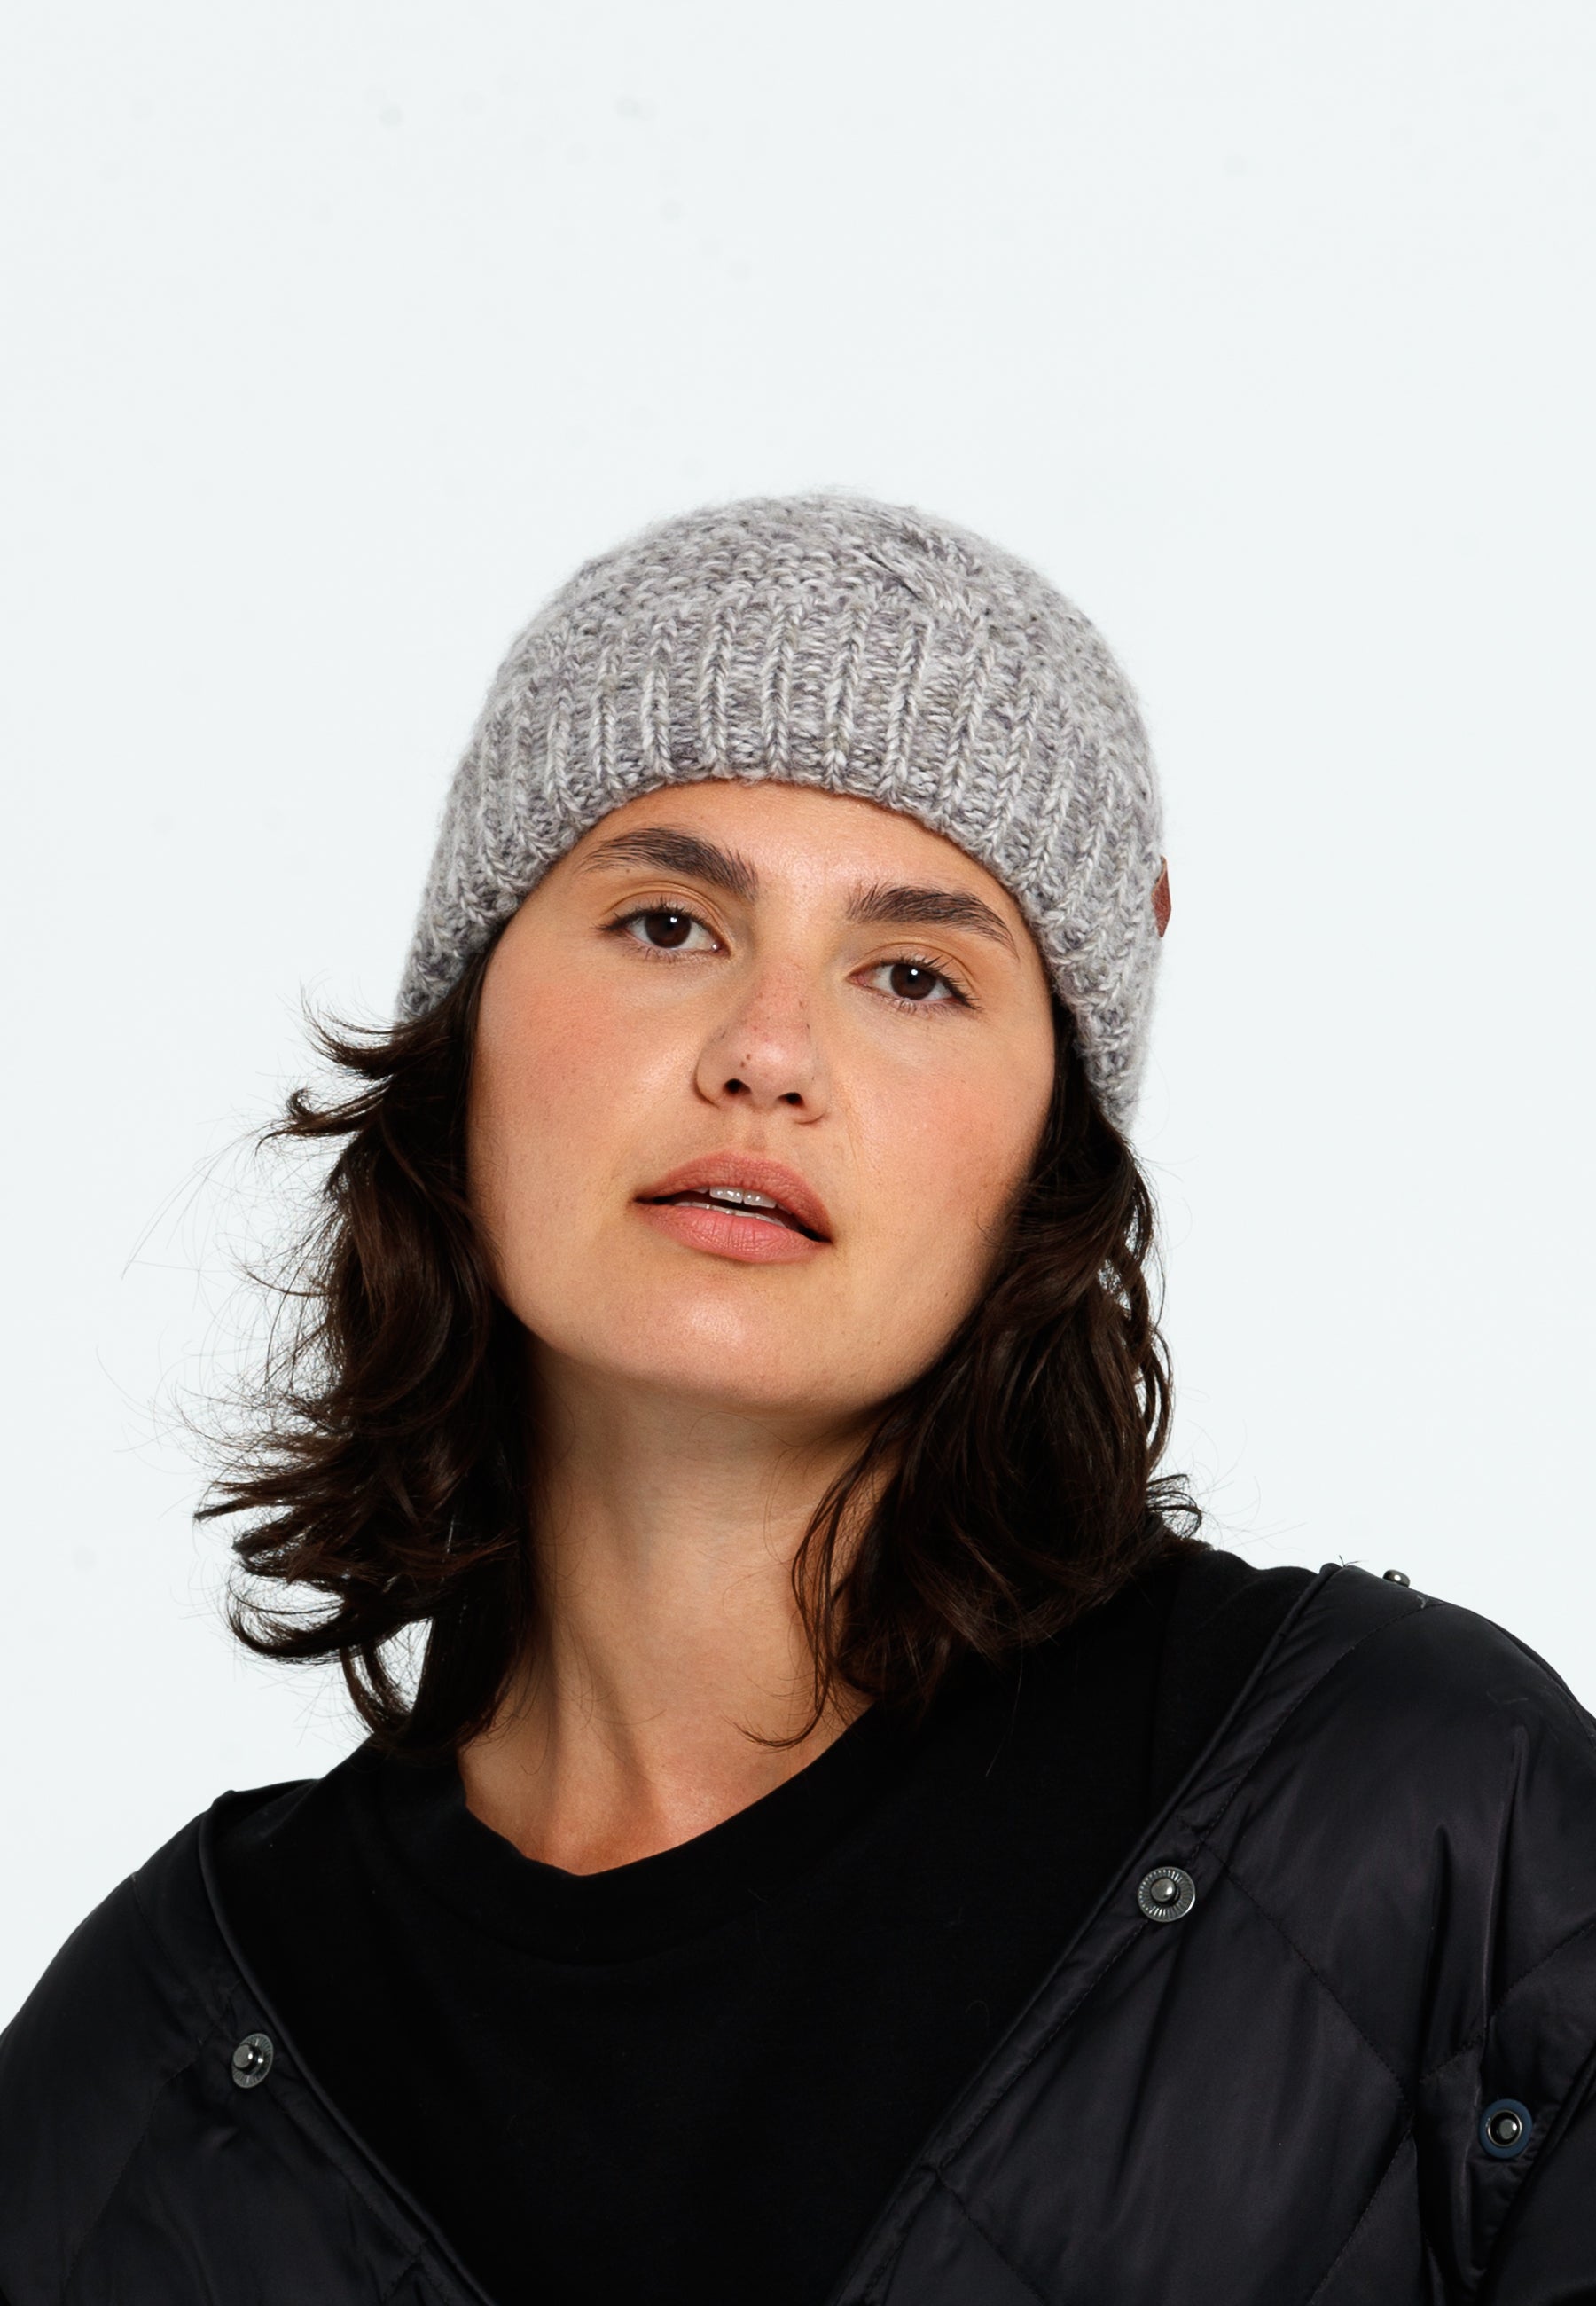 Cable knitted short model beanie